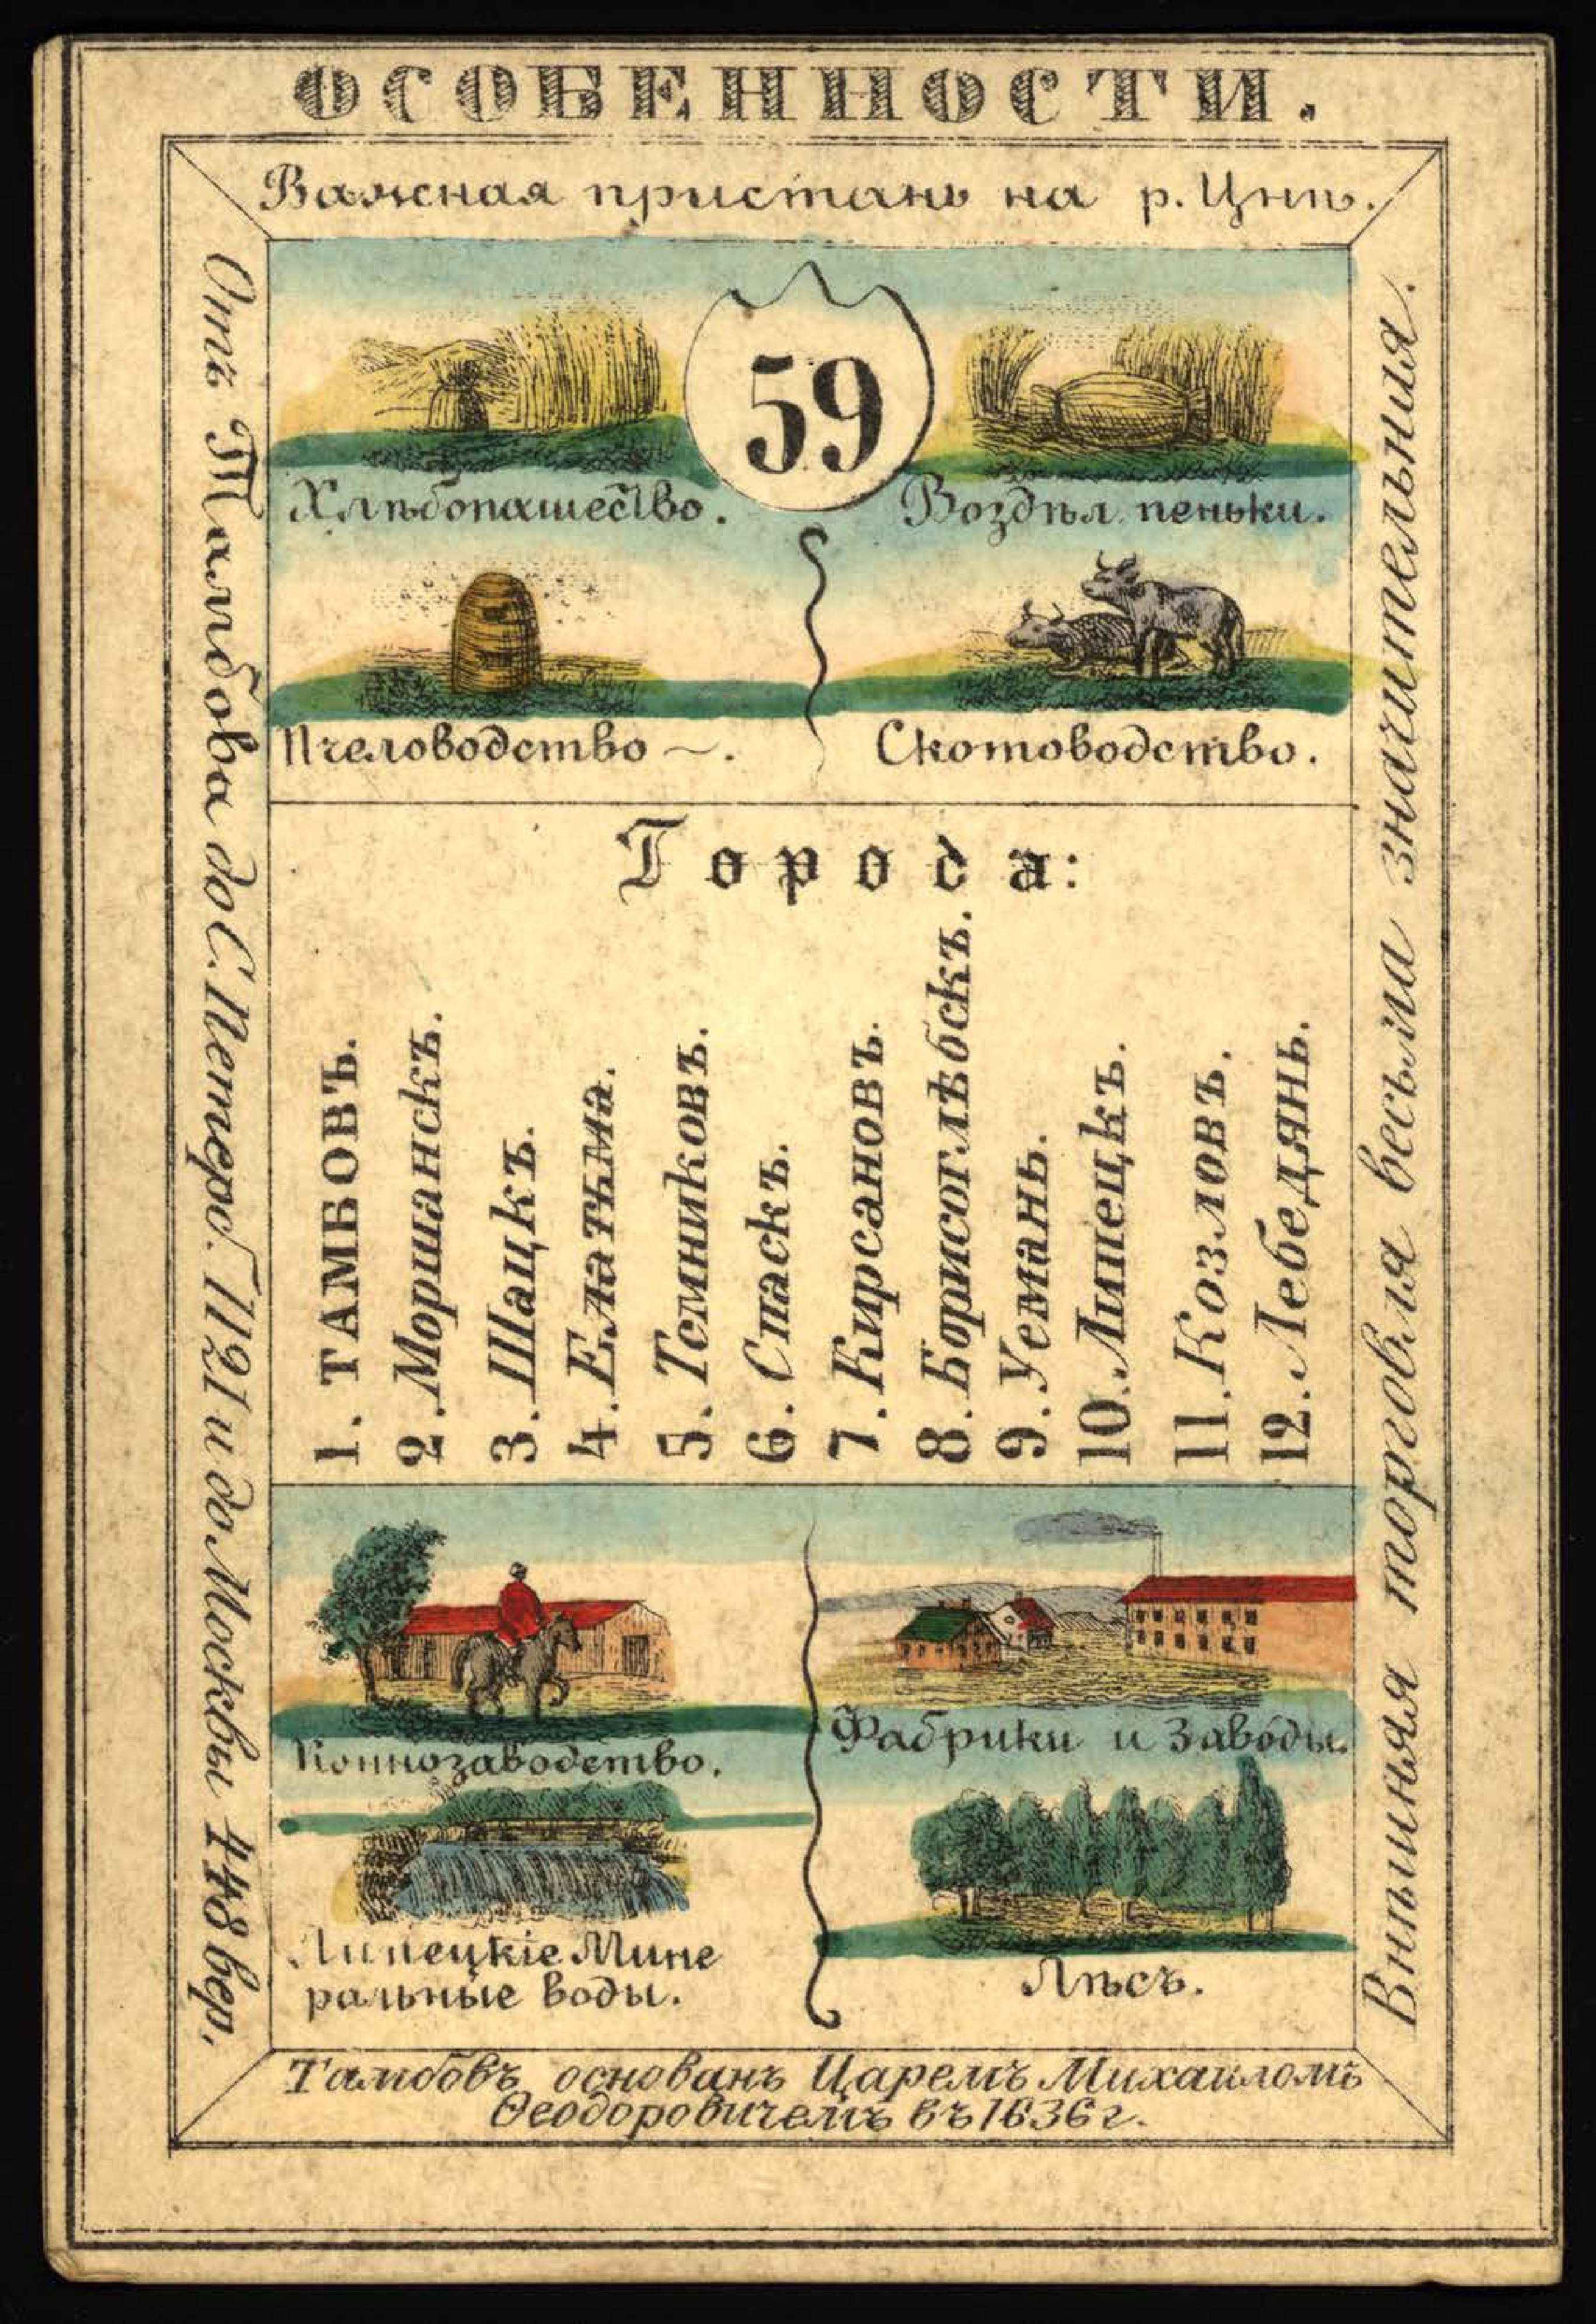 1856. Card from set of geographical cards of the Russian Empire 131